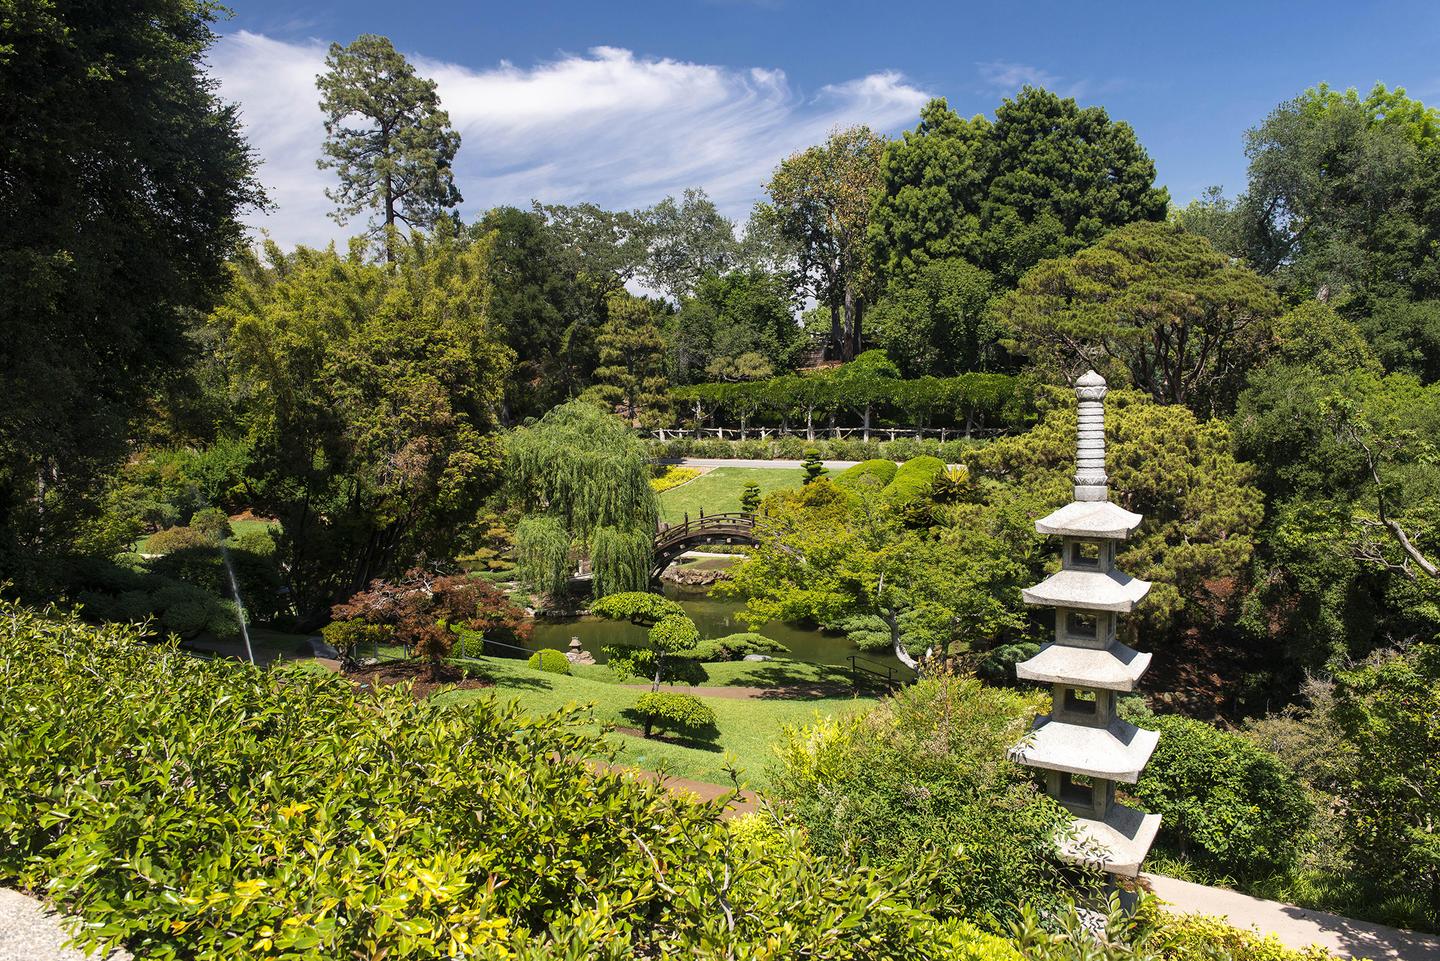 Japanese Gardens At The Huntington Library Projects Portfolio